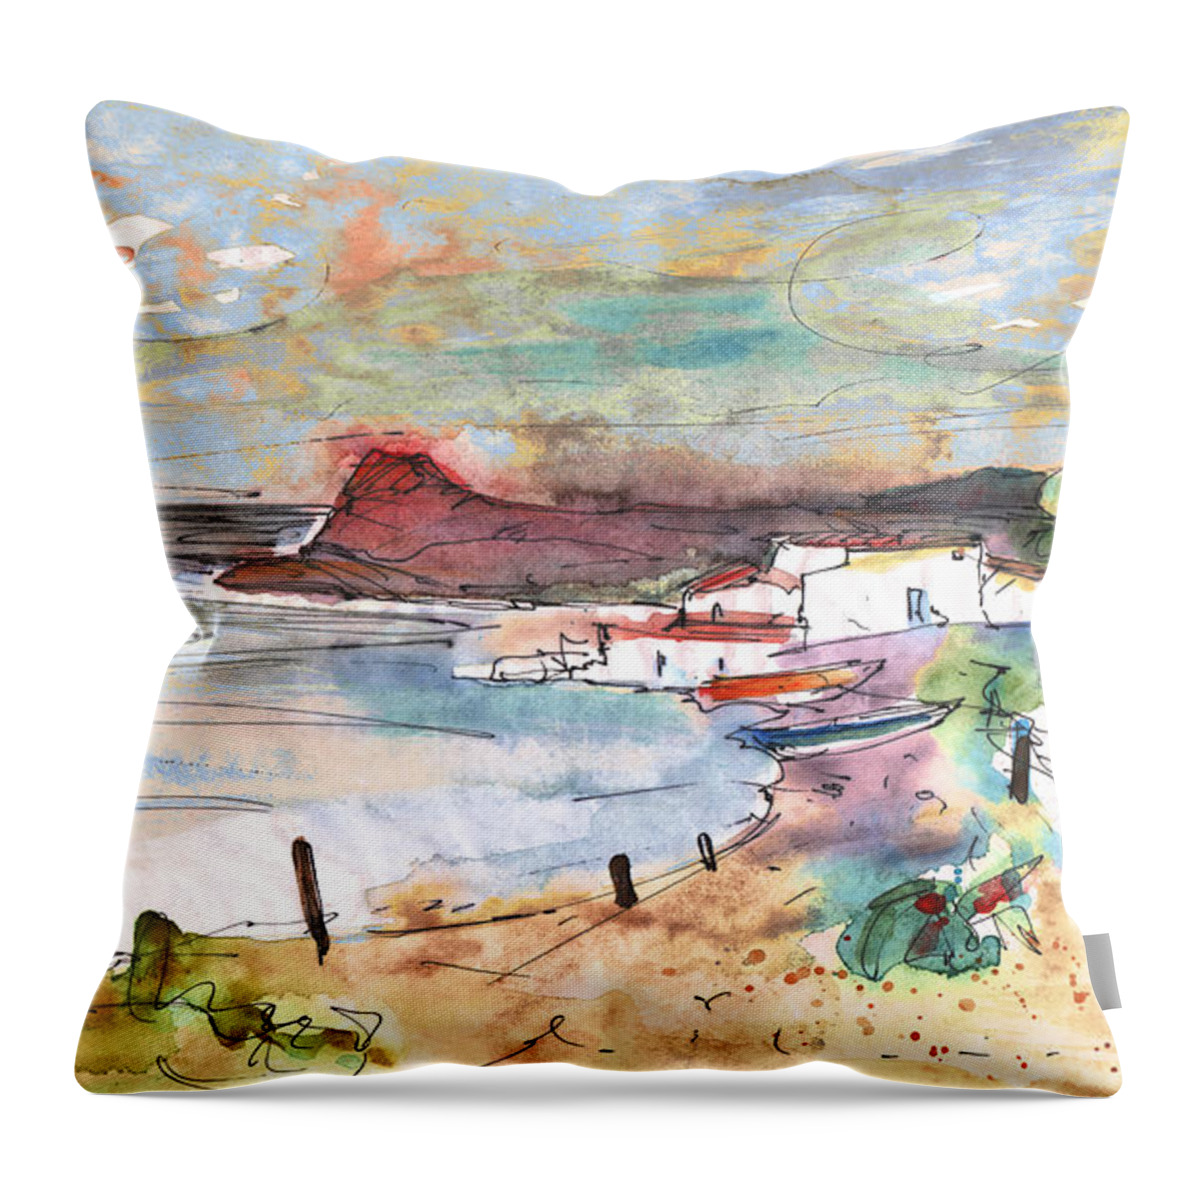 Travel Art Throw Pillow featuring the painting Lentas 01 by Miki De Goodaboom